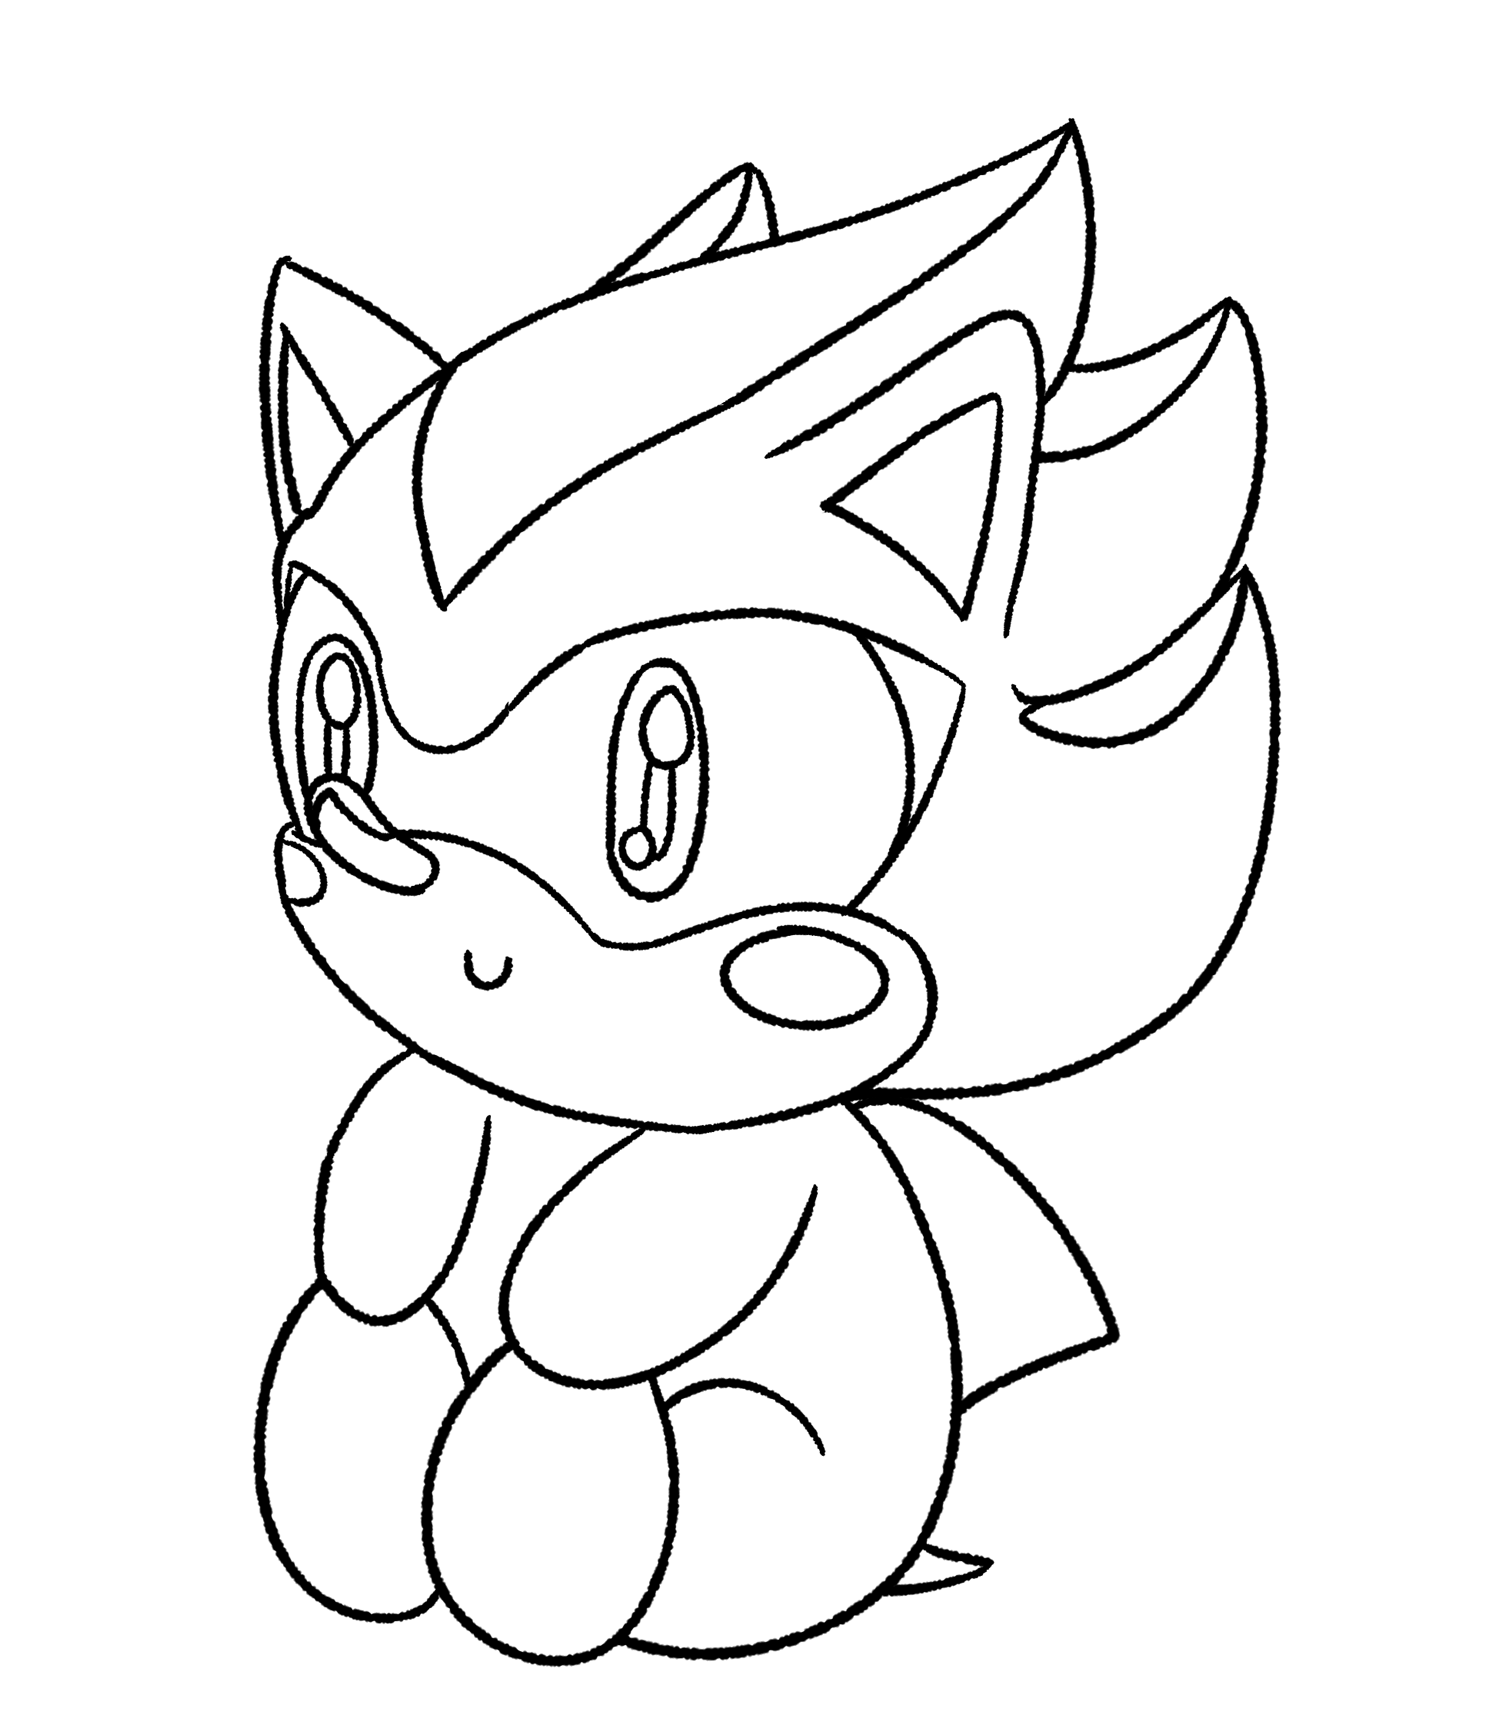 Baby shadow the hedgehog coloring page